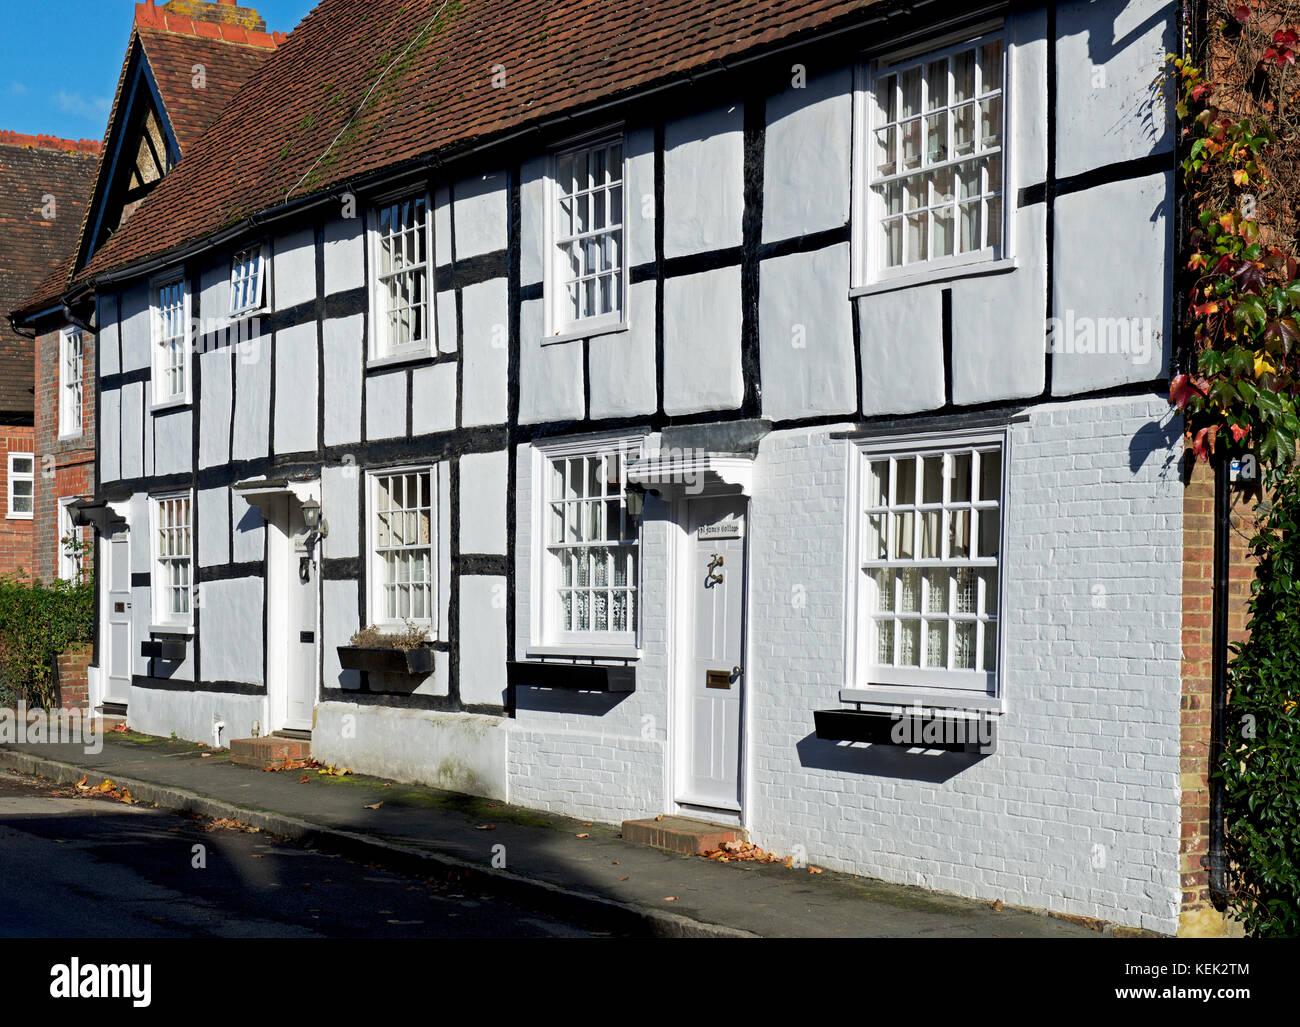 Handsome houses in the village of Fletching, East Sussex, England UK Stock Photo